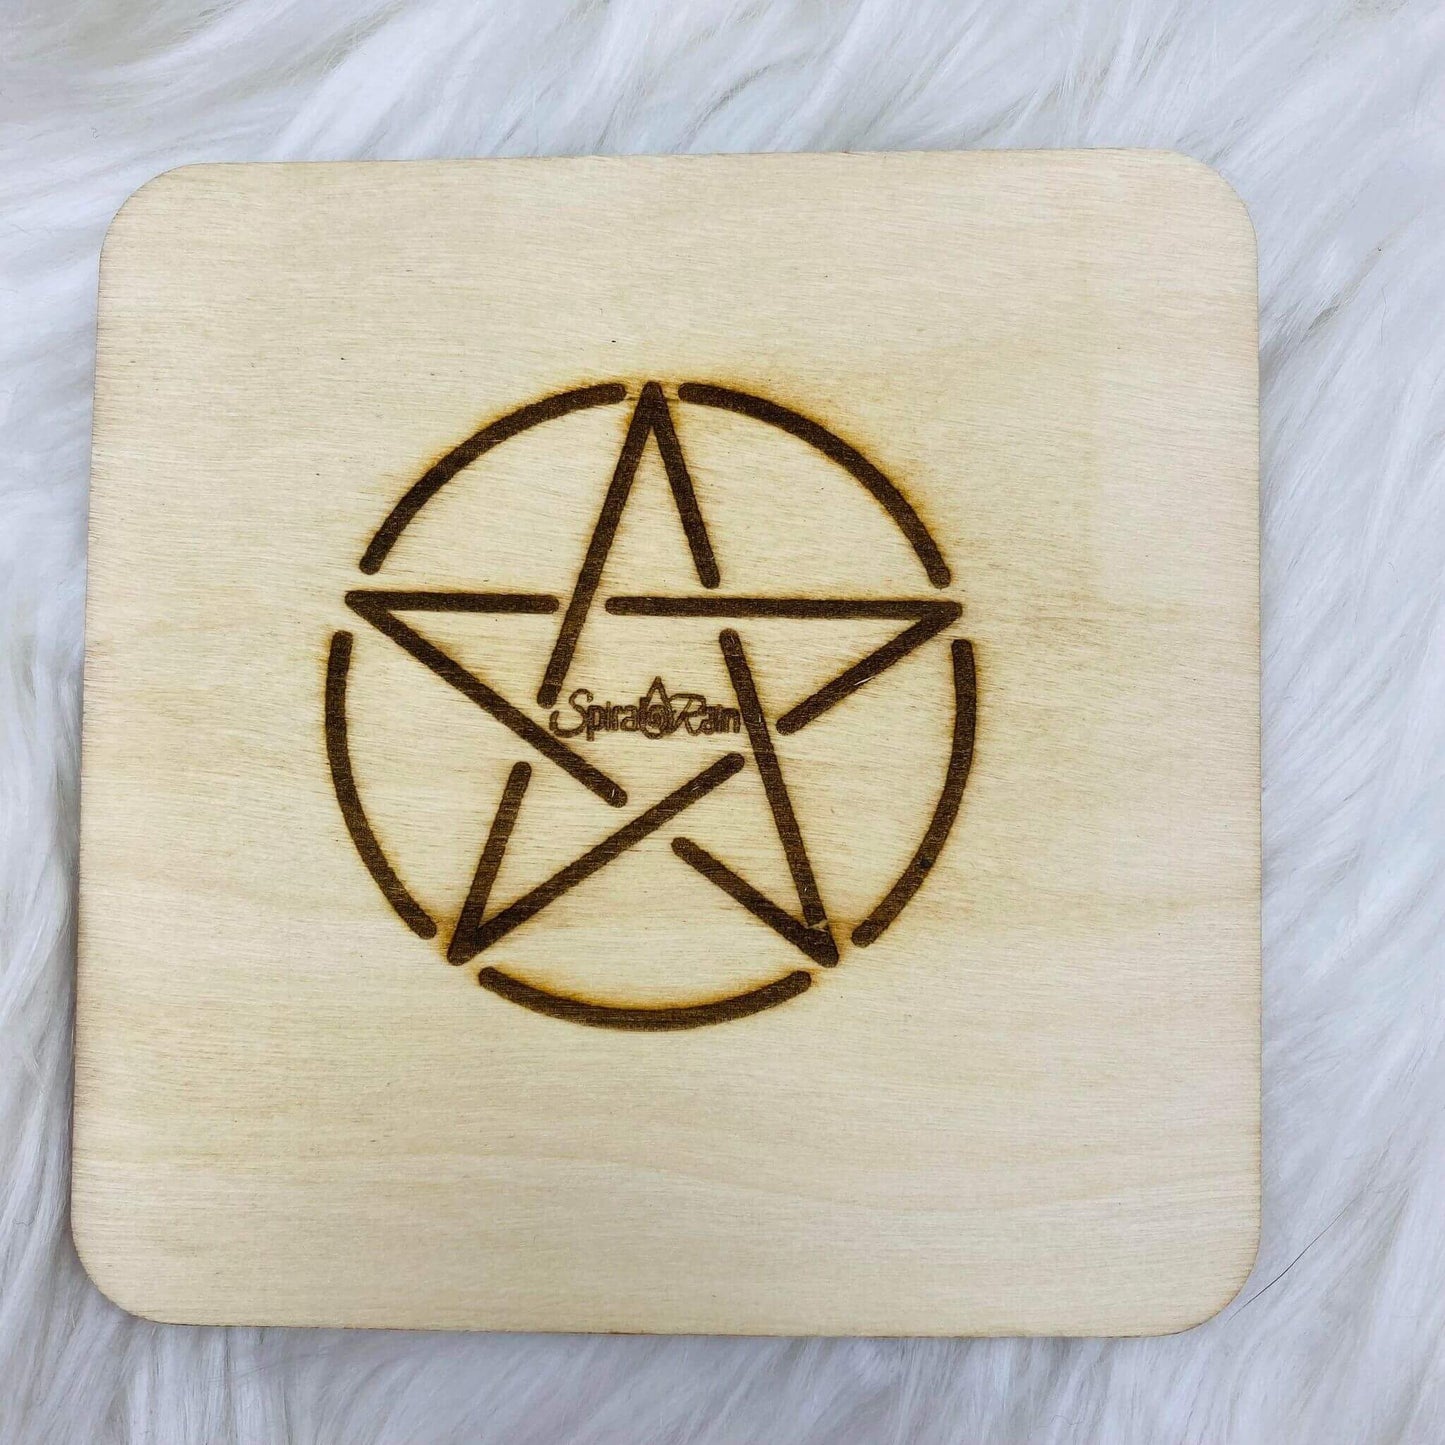 Pentagram Altar plaque 4 inch rounded square at $10 only from Spiral Rain